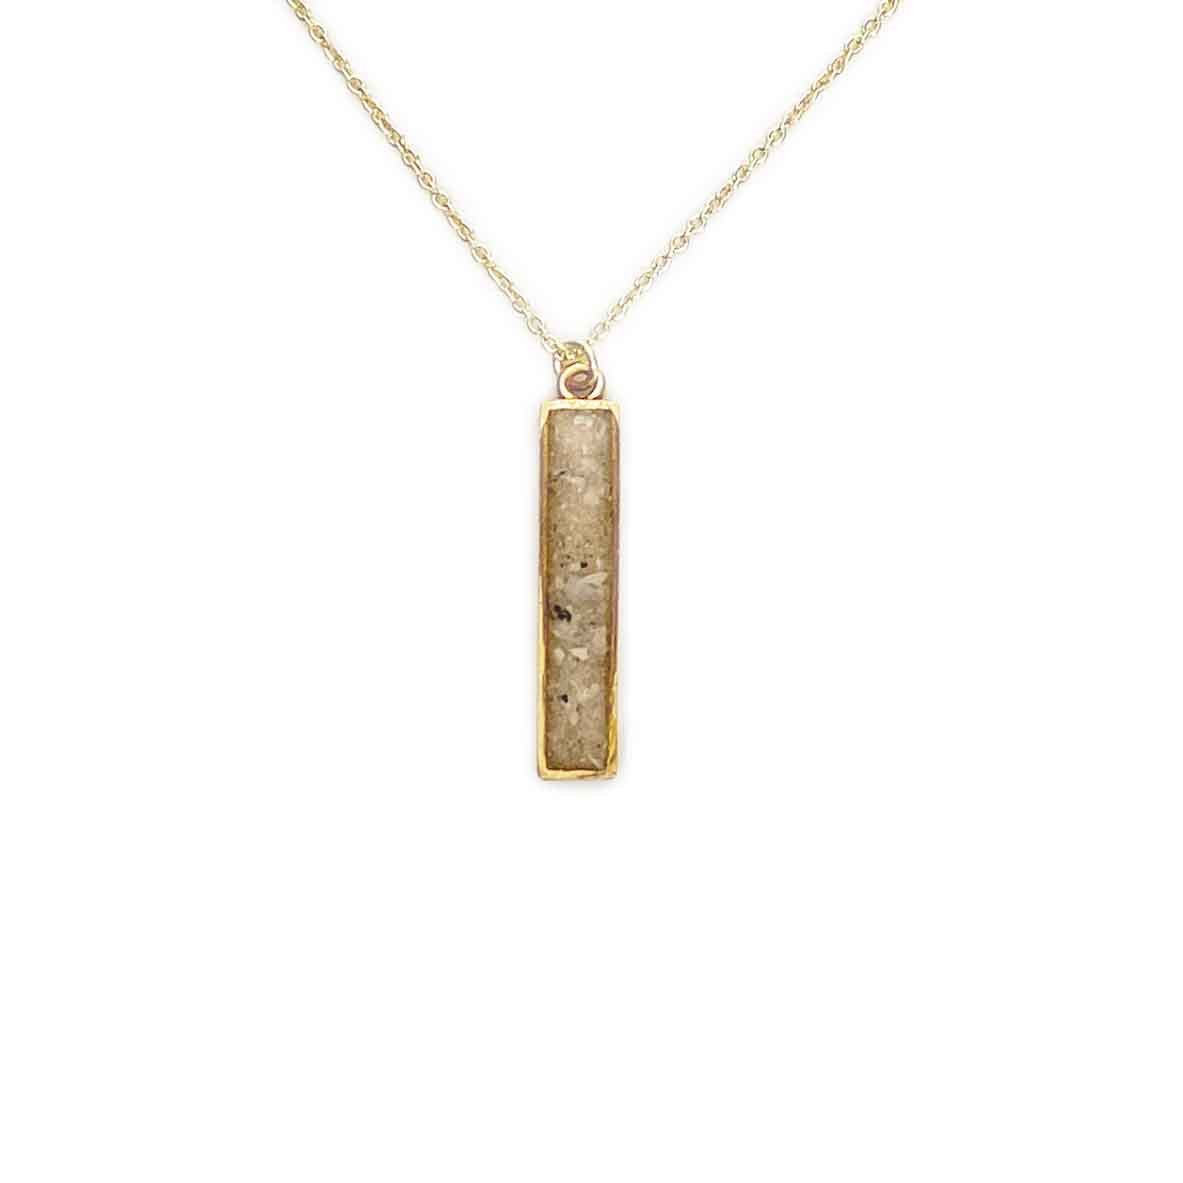 Small Beach Bar Necklace in Gold